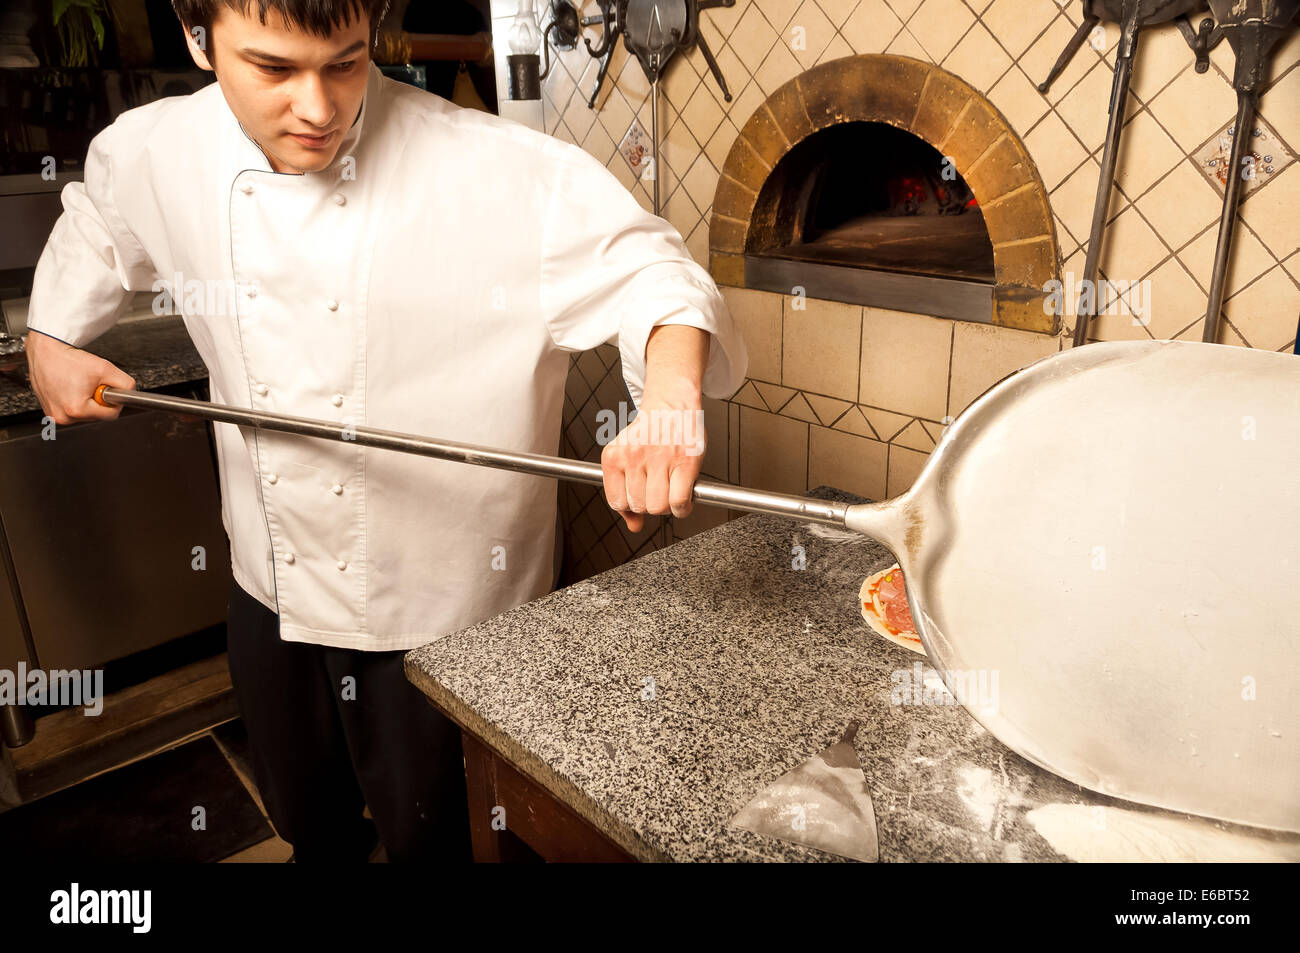 A process of preparing pizza by a chef Stock Photo